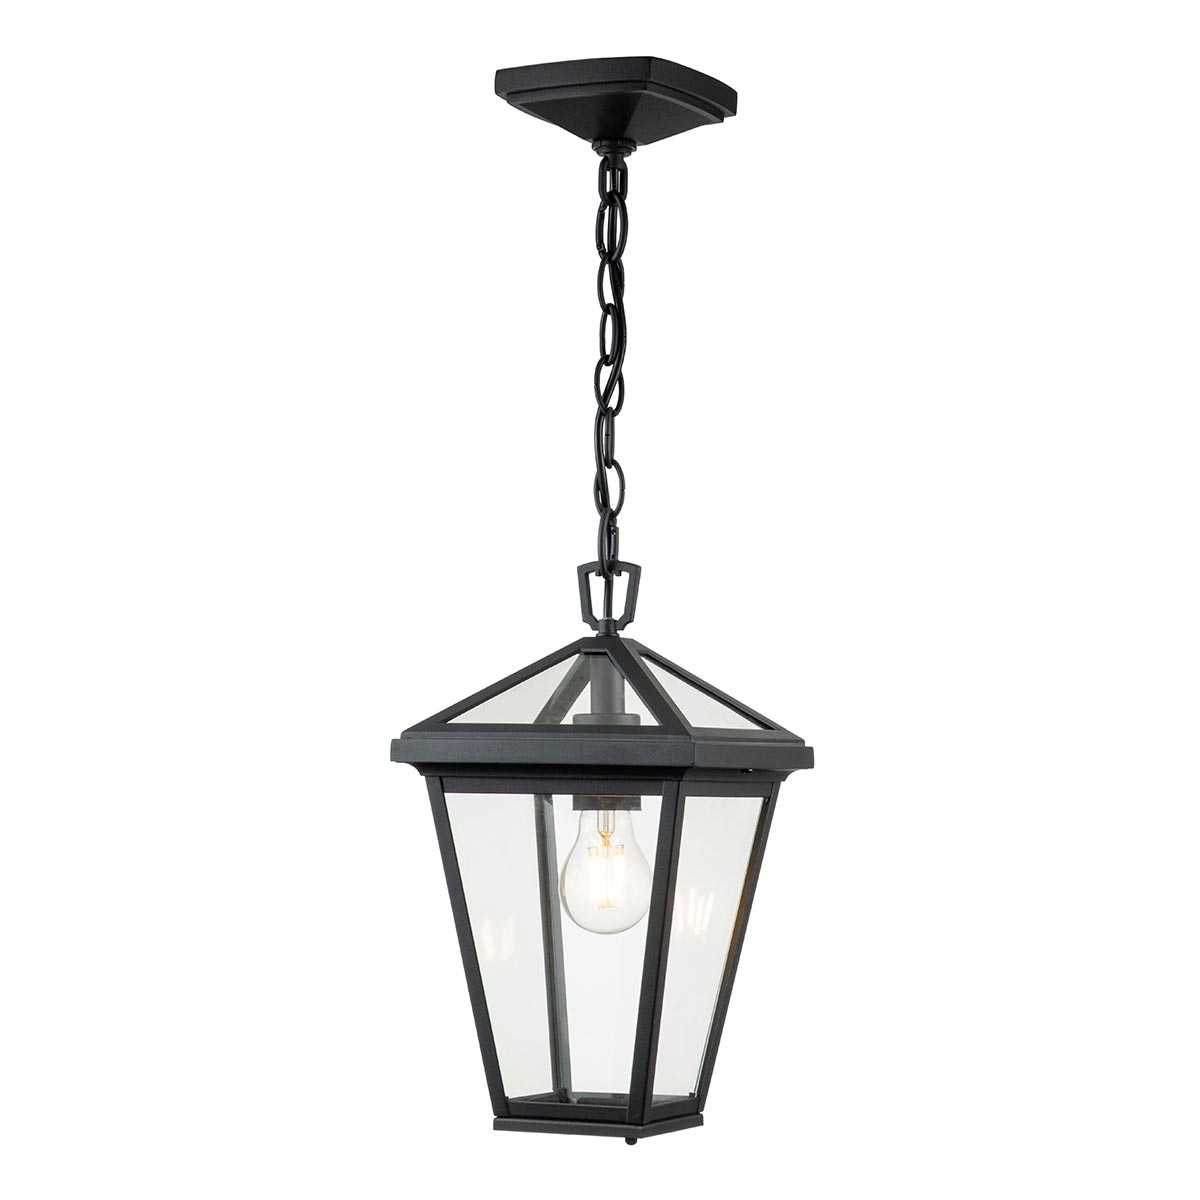 Quintiesse Alford Place Small 1 Light Outdoor Porch Chain Lantern Black